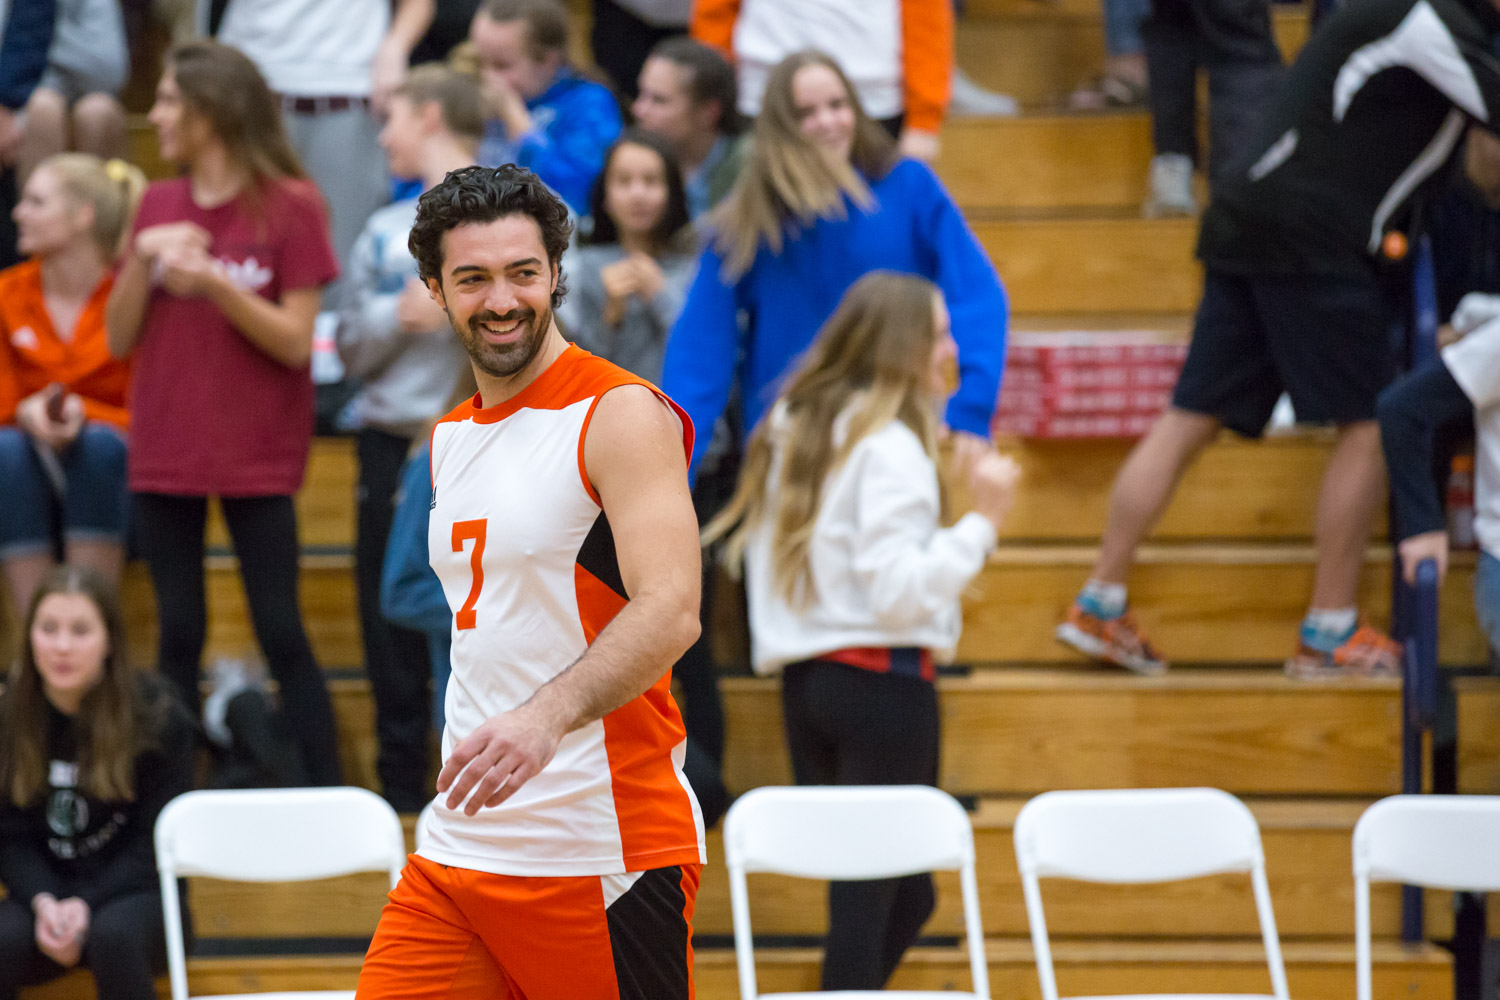 Man smiling on a vollleyball court